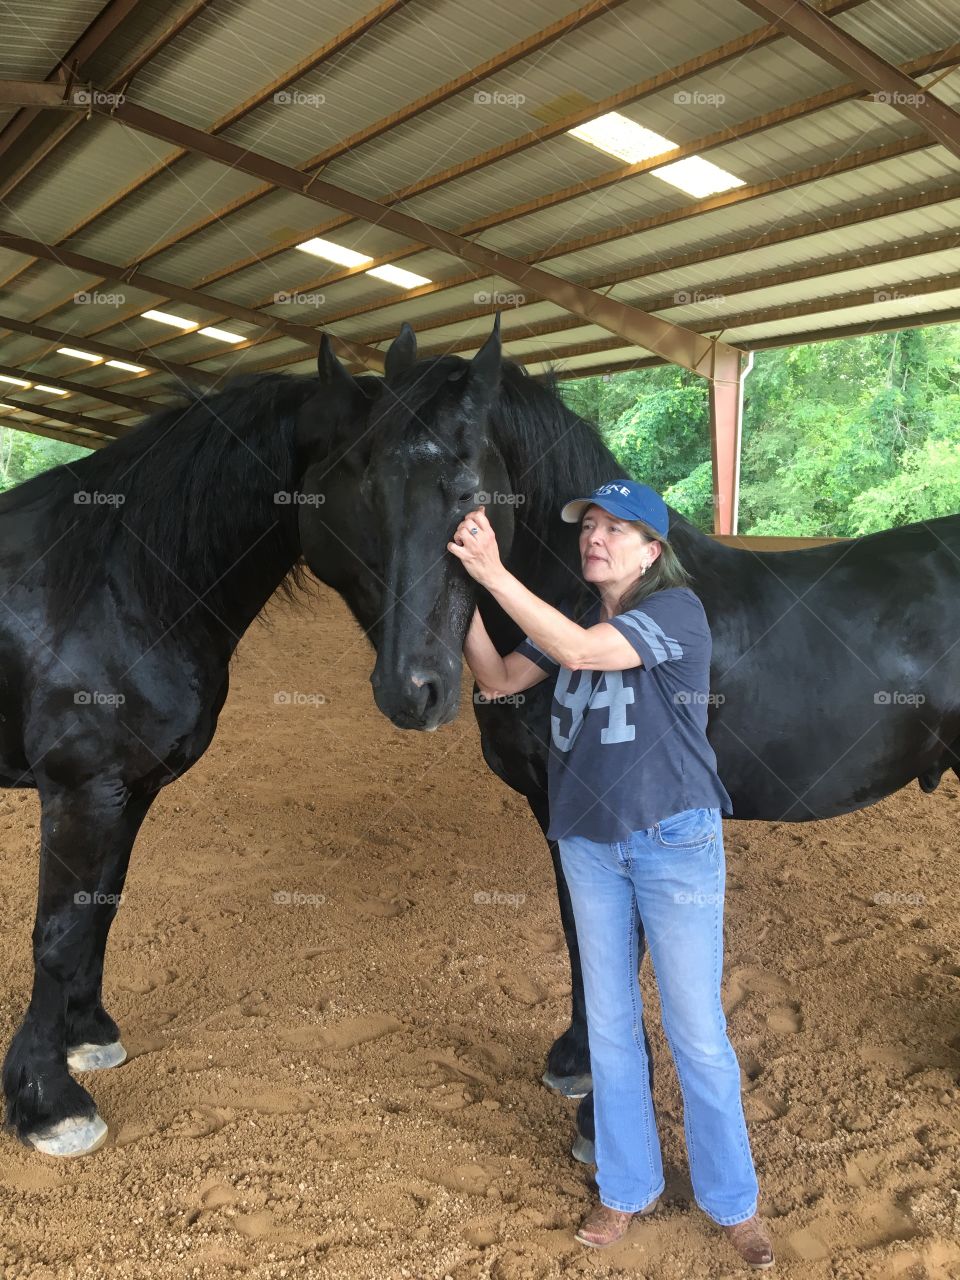 Equine, facility, Horse Therapy, Belgian blacks, Stallions, majestic, healing, therapeutic, stables, barn, corral, no tack, Bareback, kind, horsewoman, no fear,